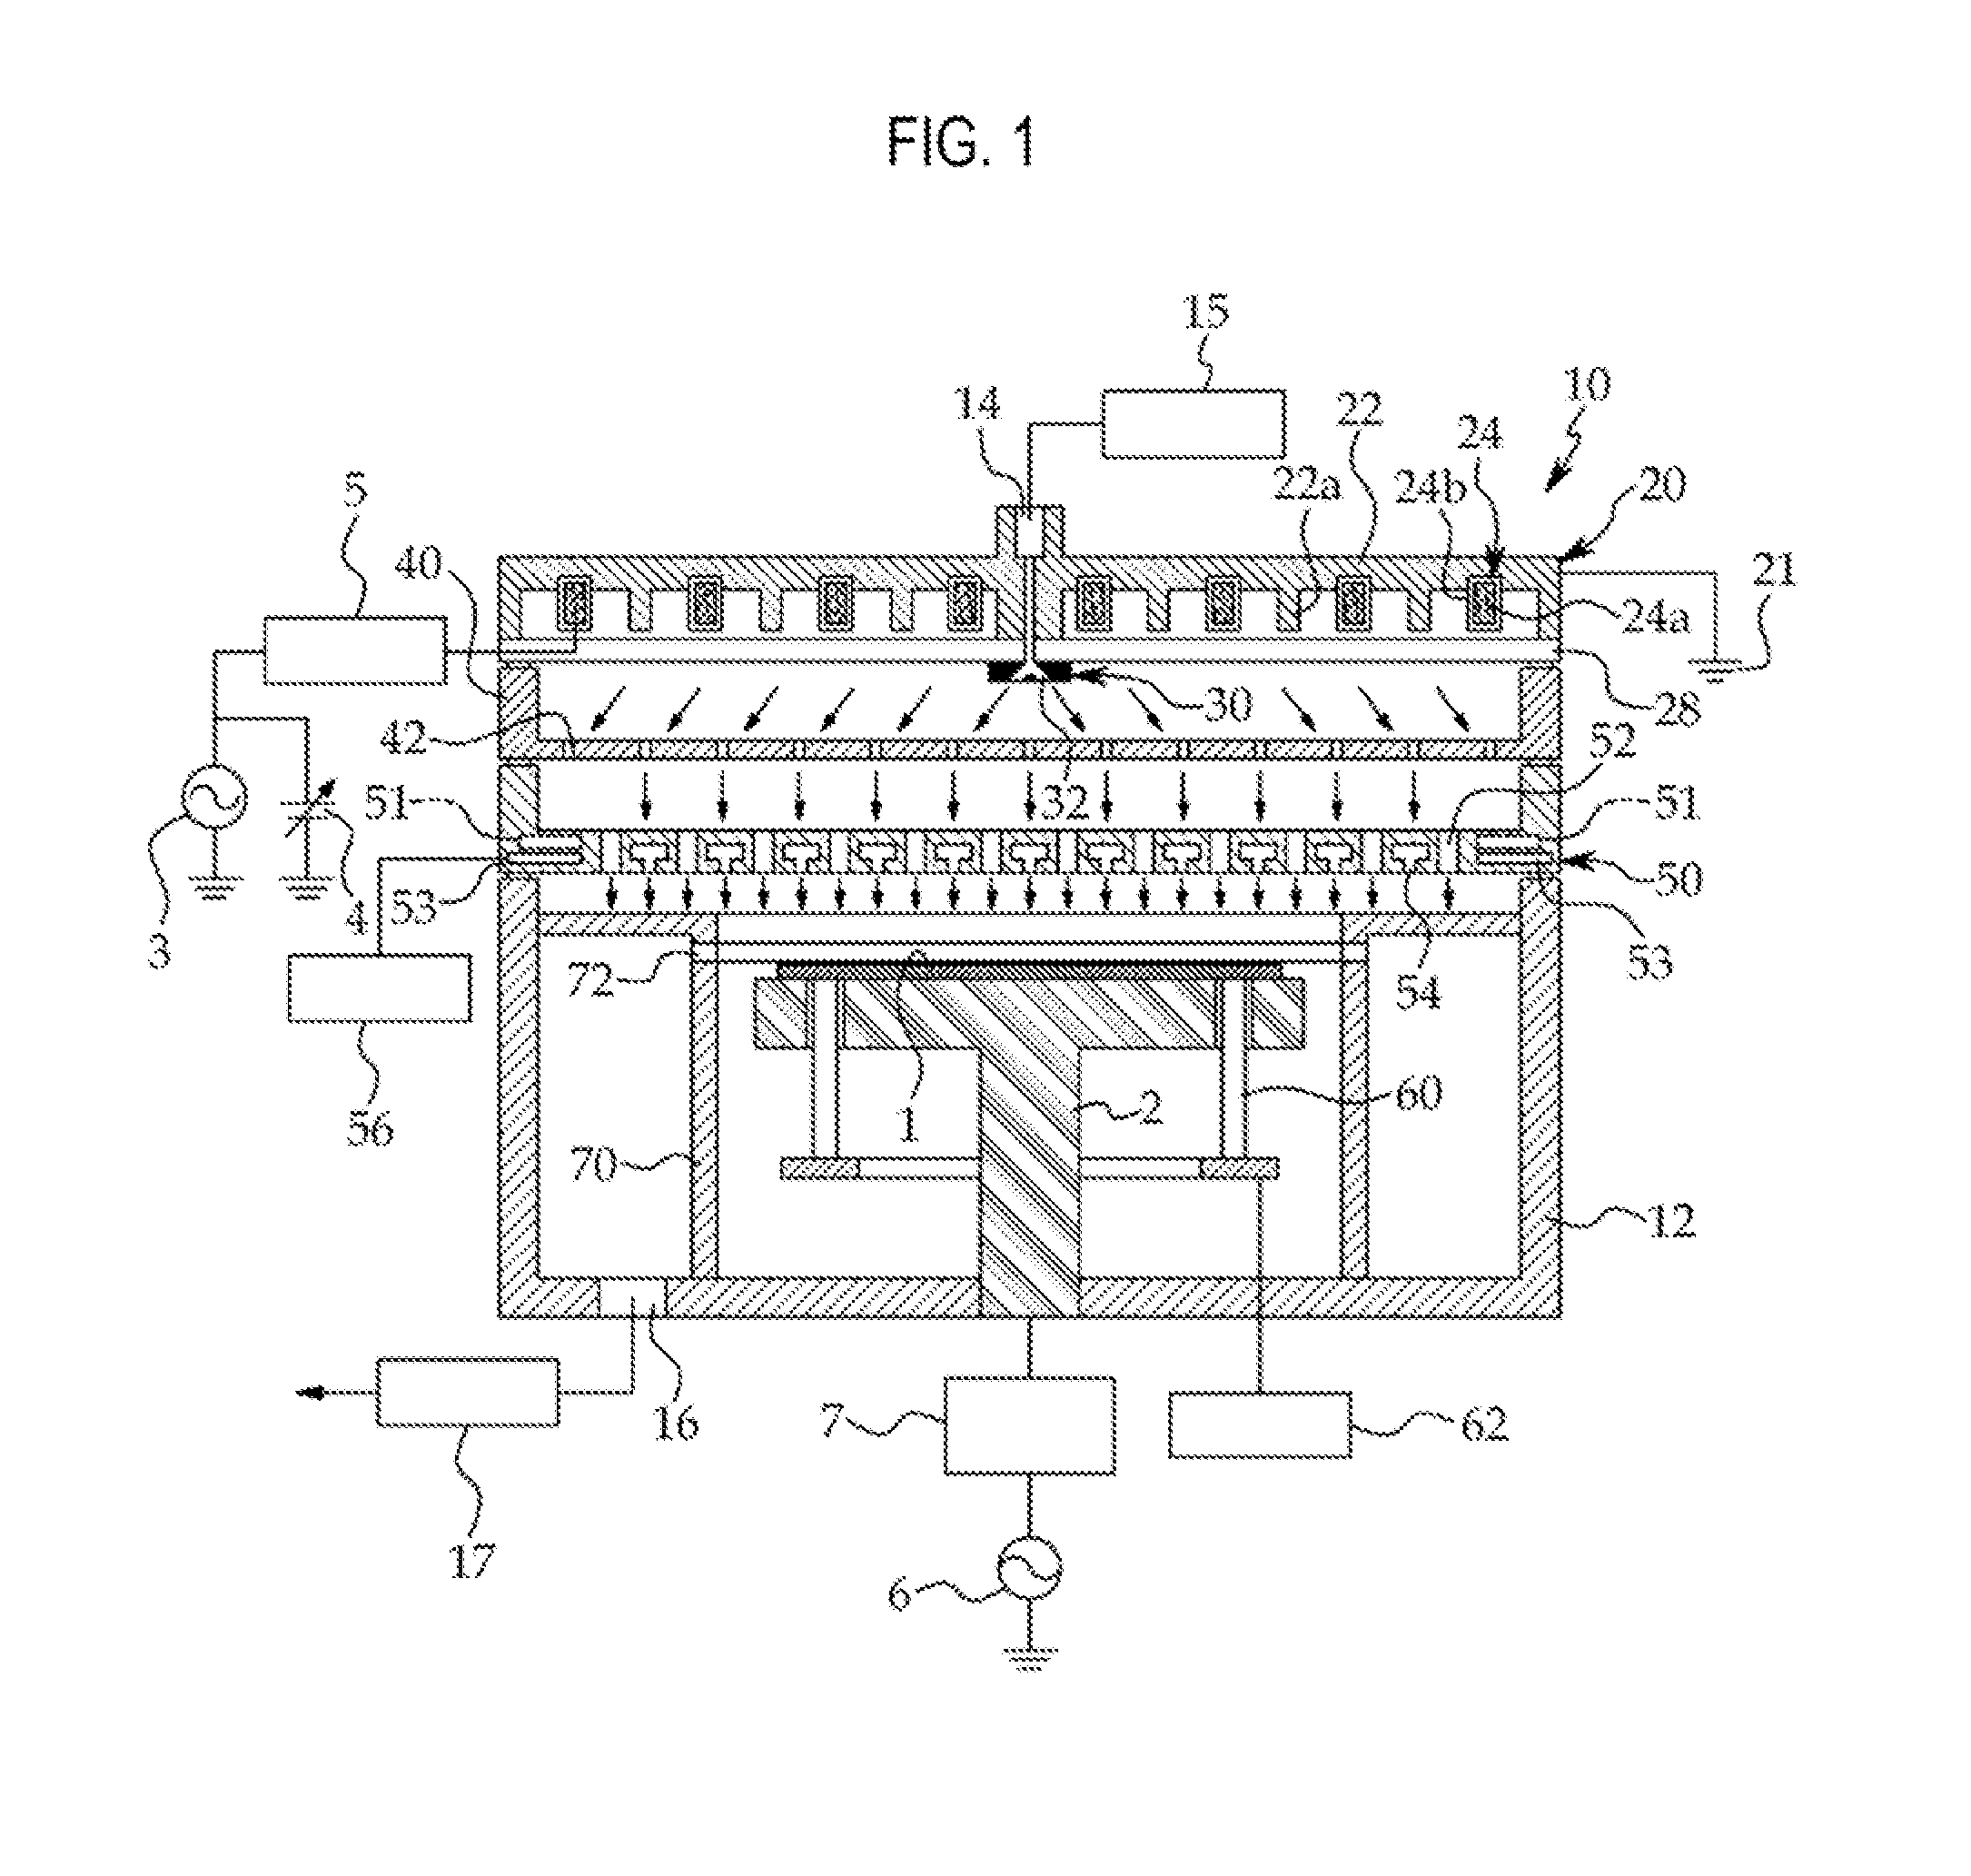 Plasma processing apparatus for vapor phase etching and cleaning